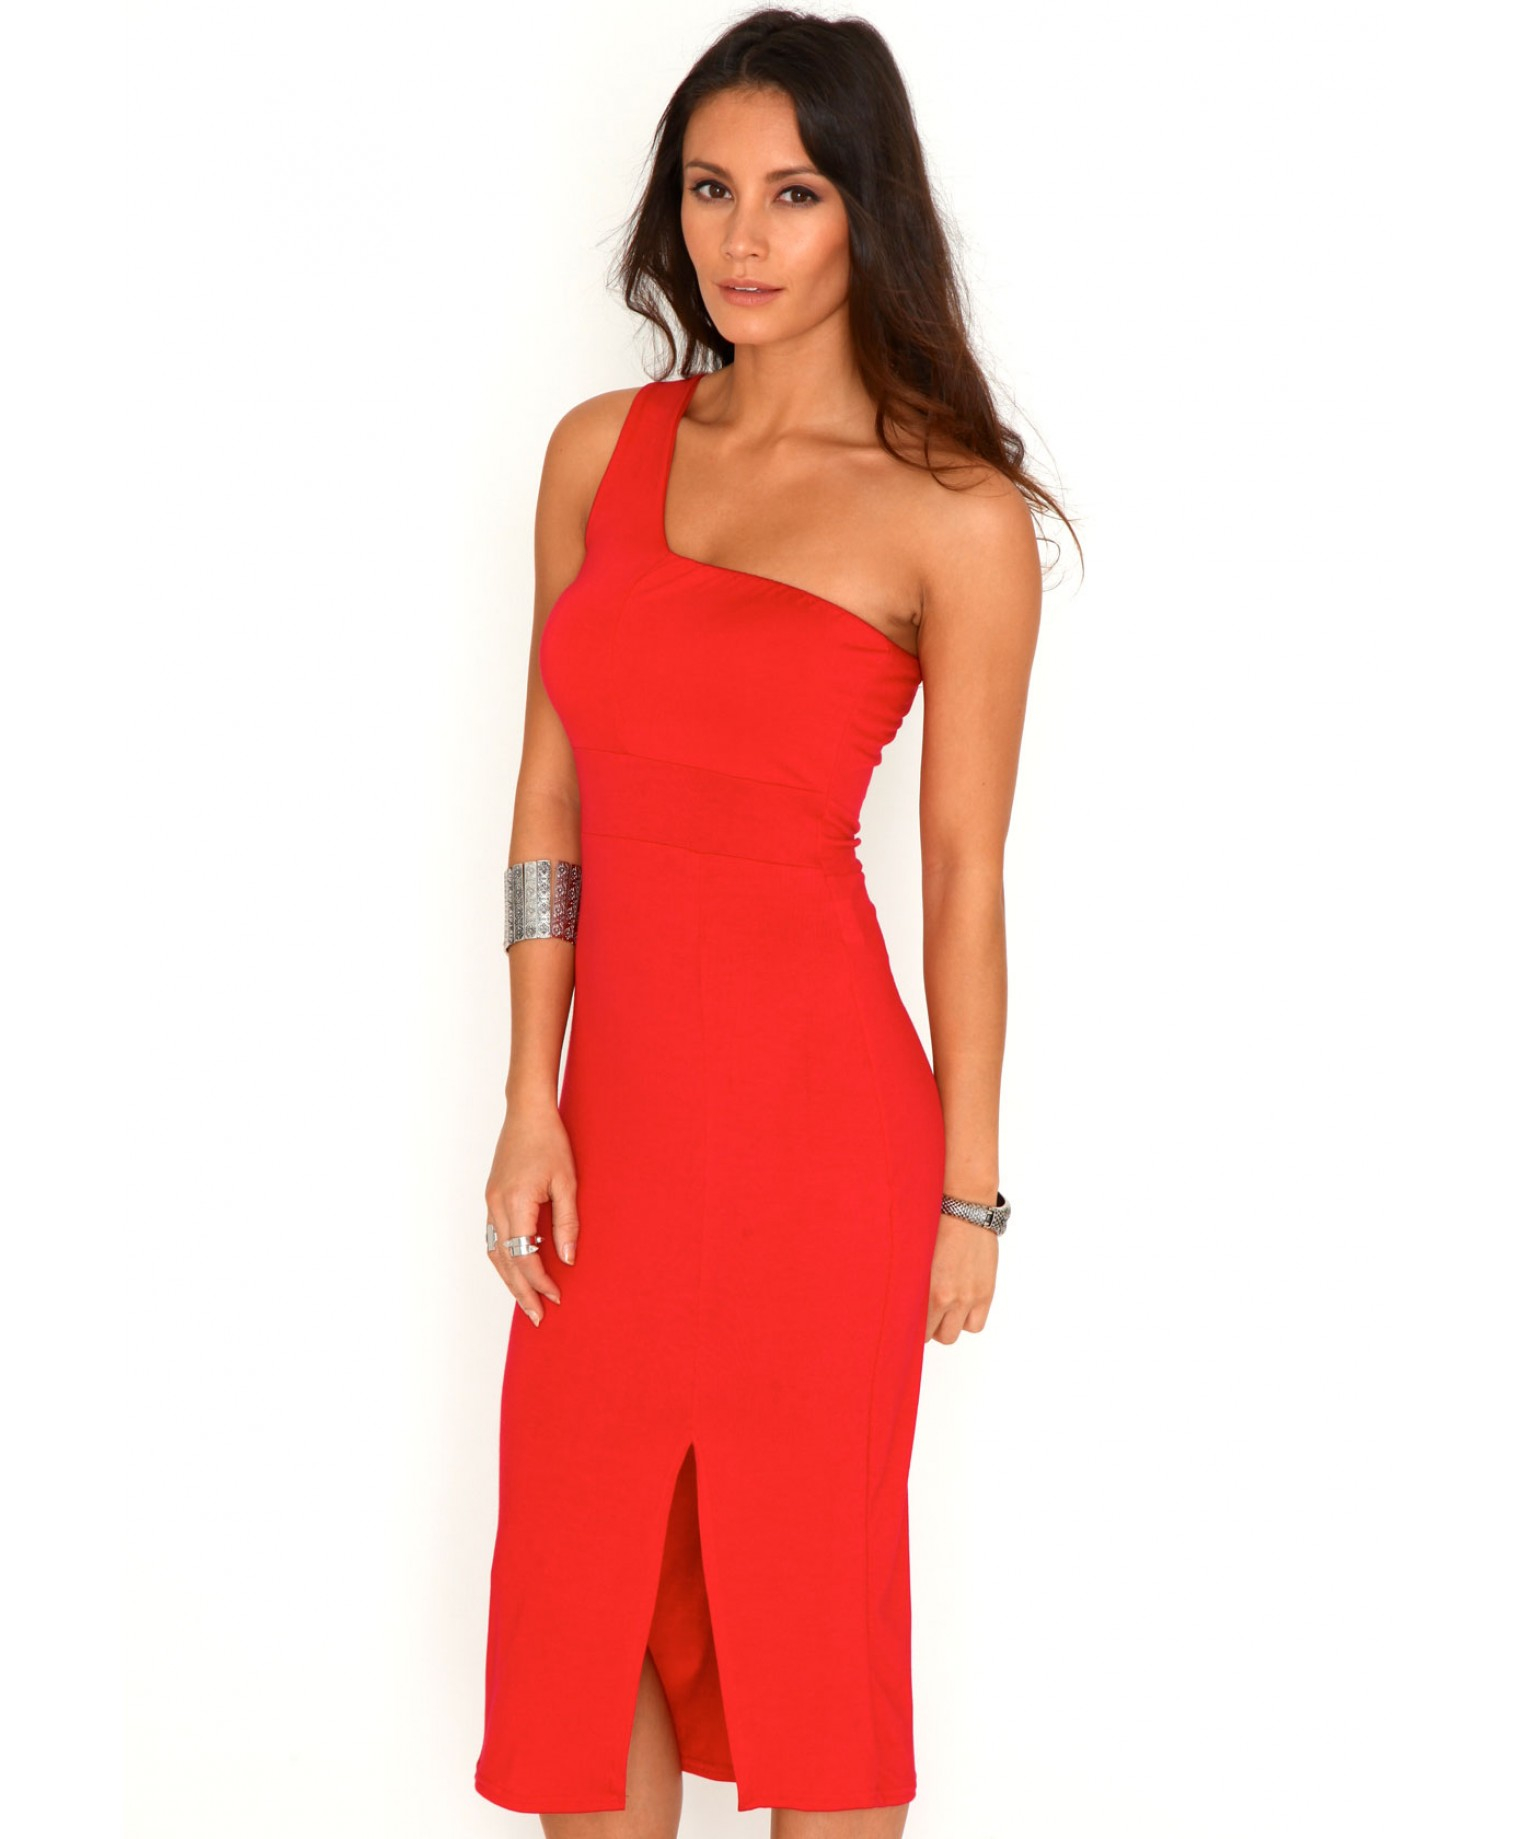 Missguided Rhoni One Shoulder Side Split Midi Dress in Red in Red | Lyst